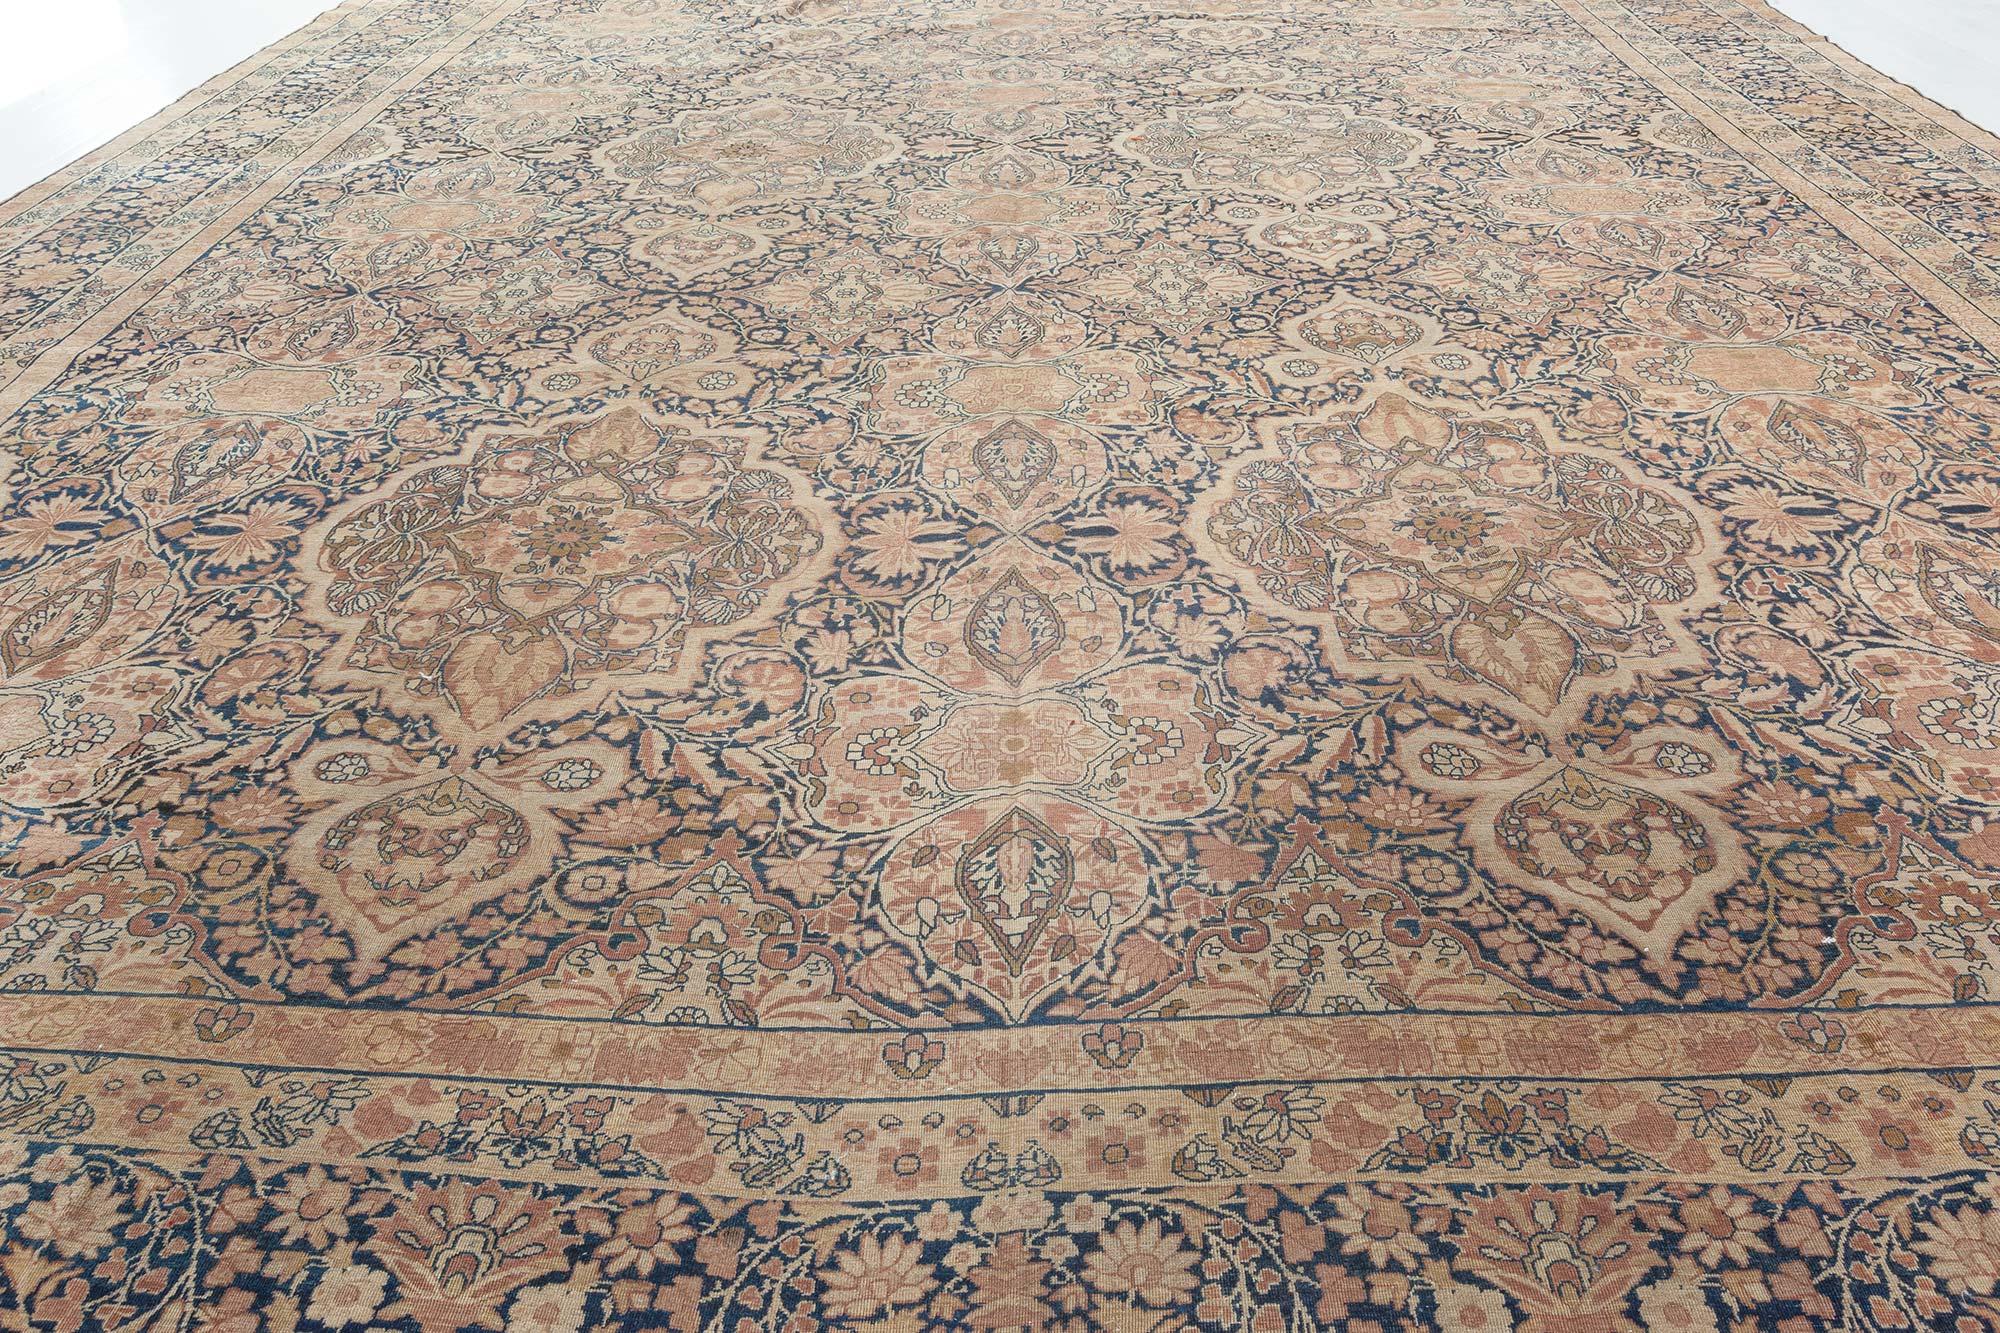 One-of-a-kind Antique Persian kirman brown rug
Size: 13'8